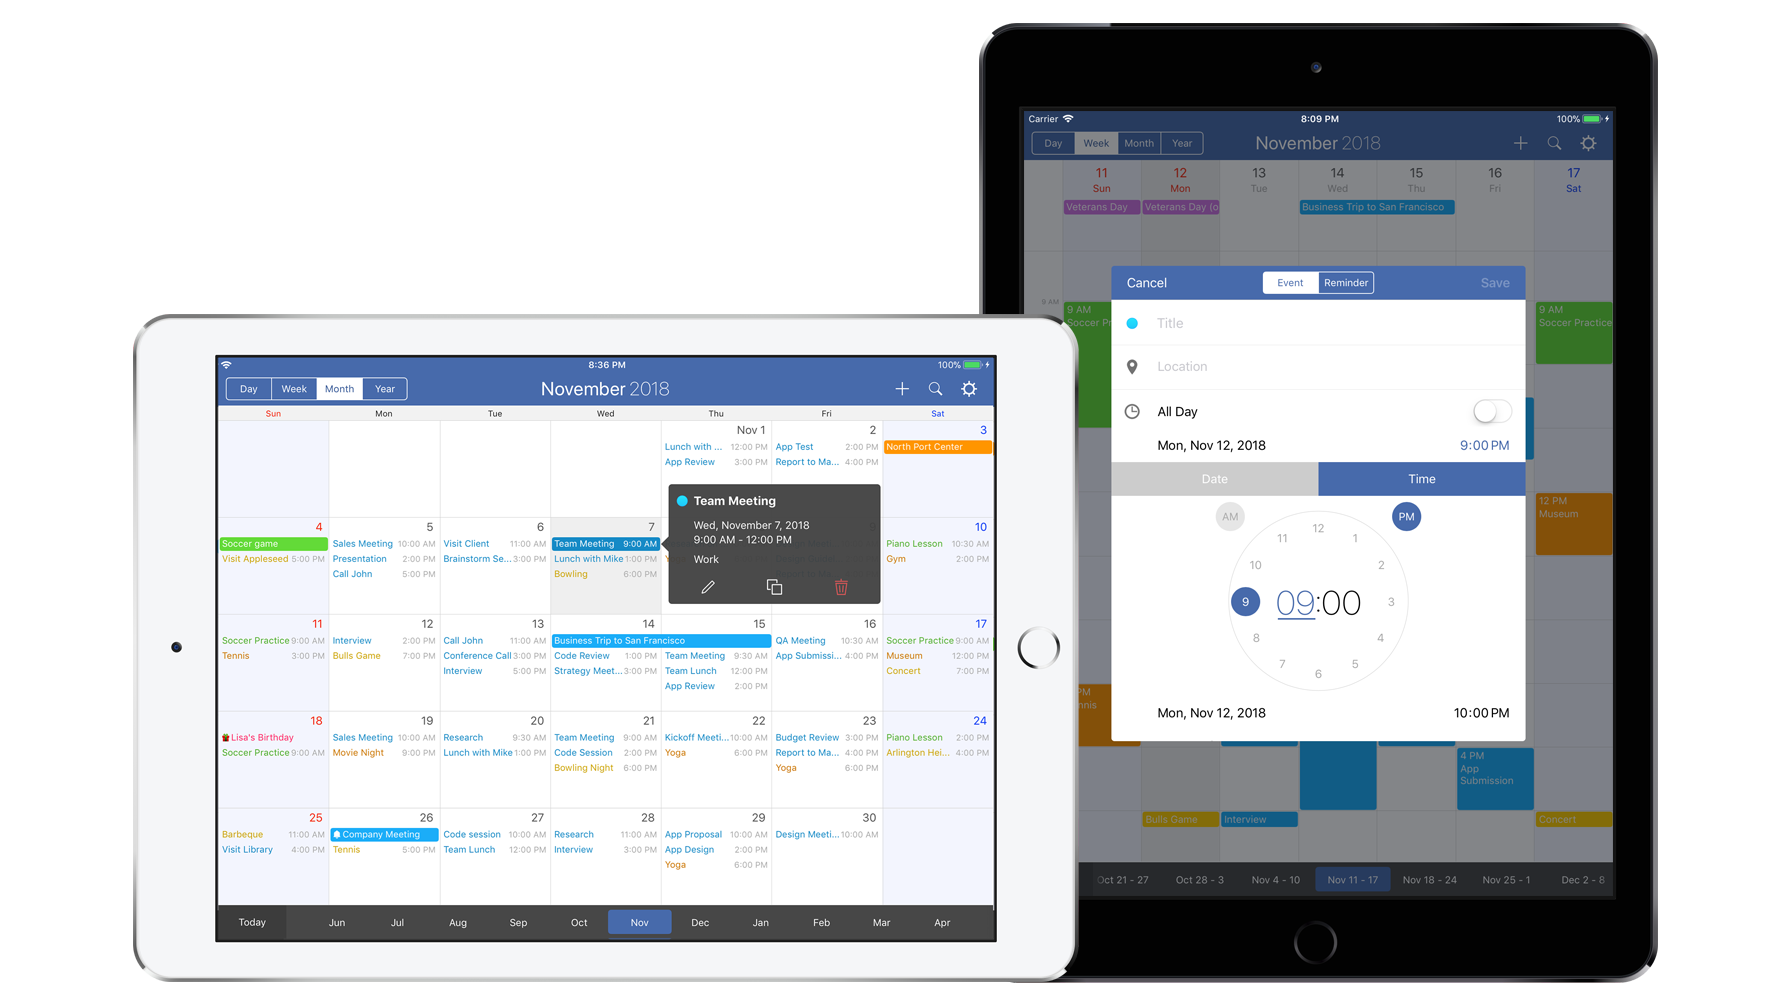 FirstSeed Calendar for iPad is now available on the App Store